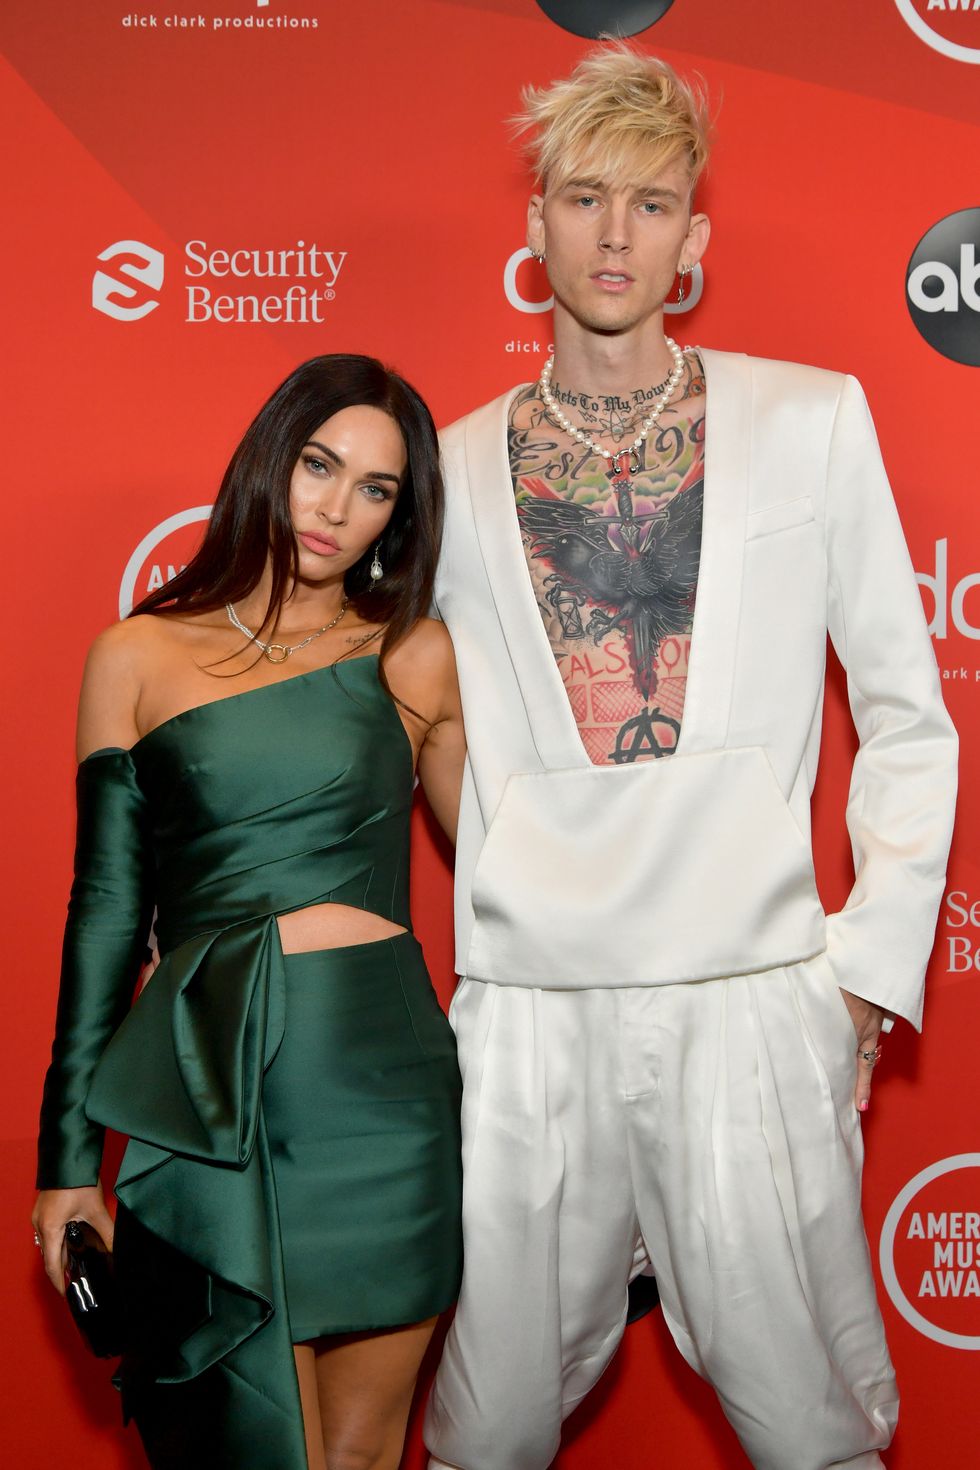 megan fox and machine gun kelly at the american music awards in november 2020, their first red carpet appearance together